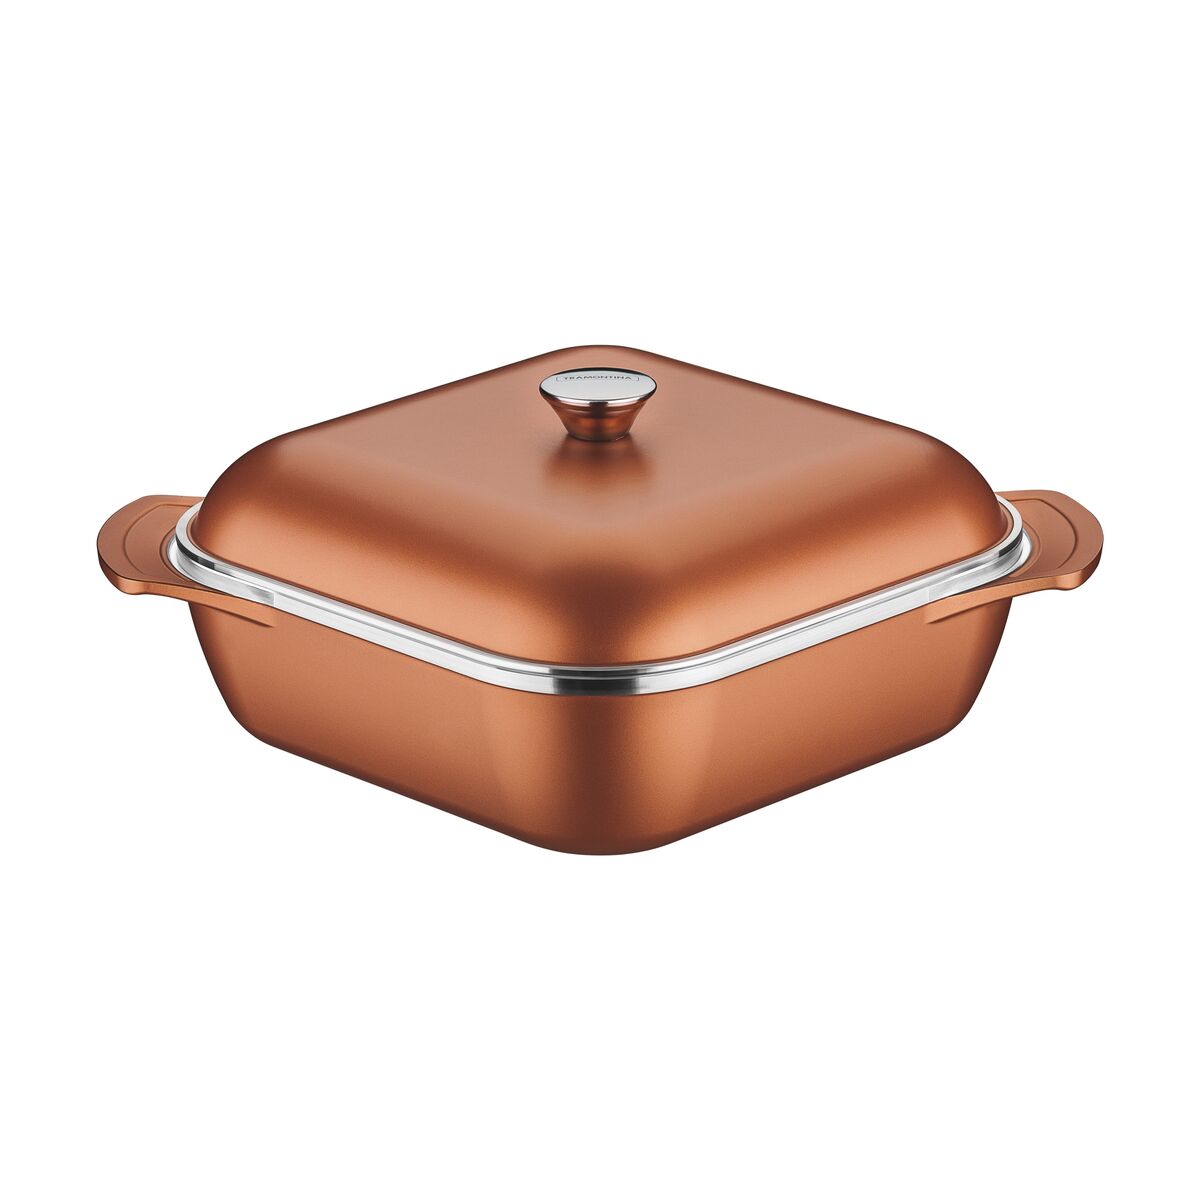 Tramontina Lyon forged aluminum, golden, square casserole with interior Starflon High Performance nonstick coating and lid, 28 cm, 5.5 L